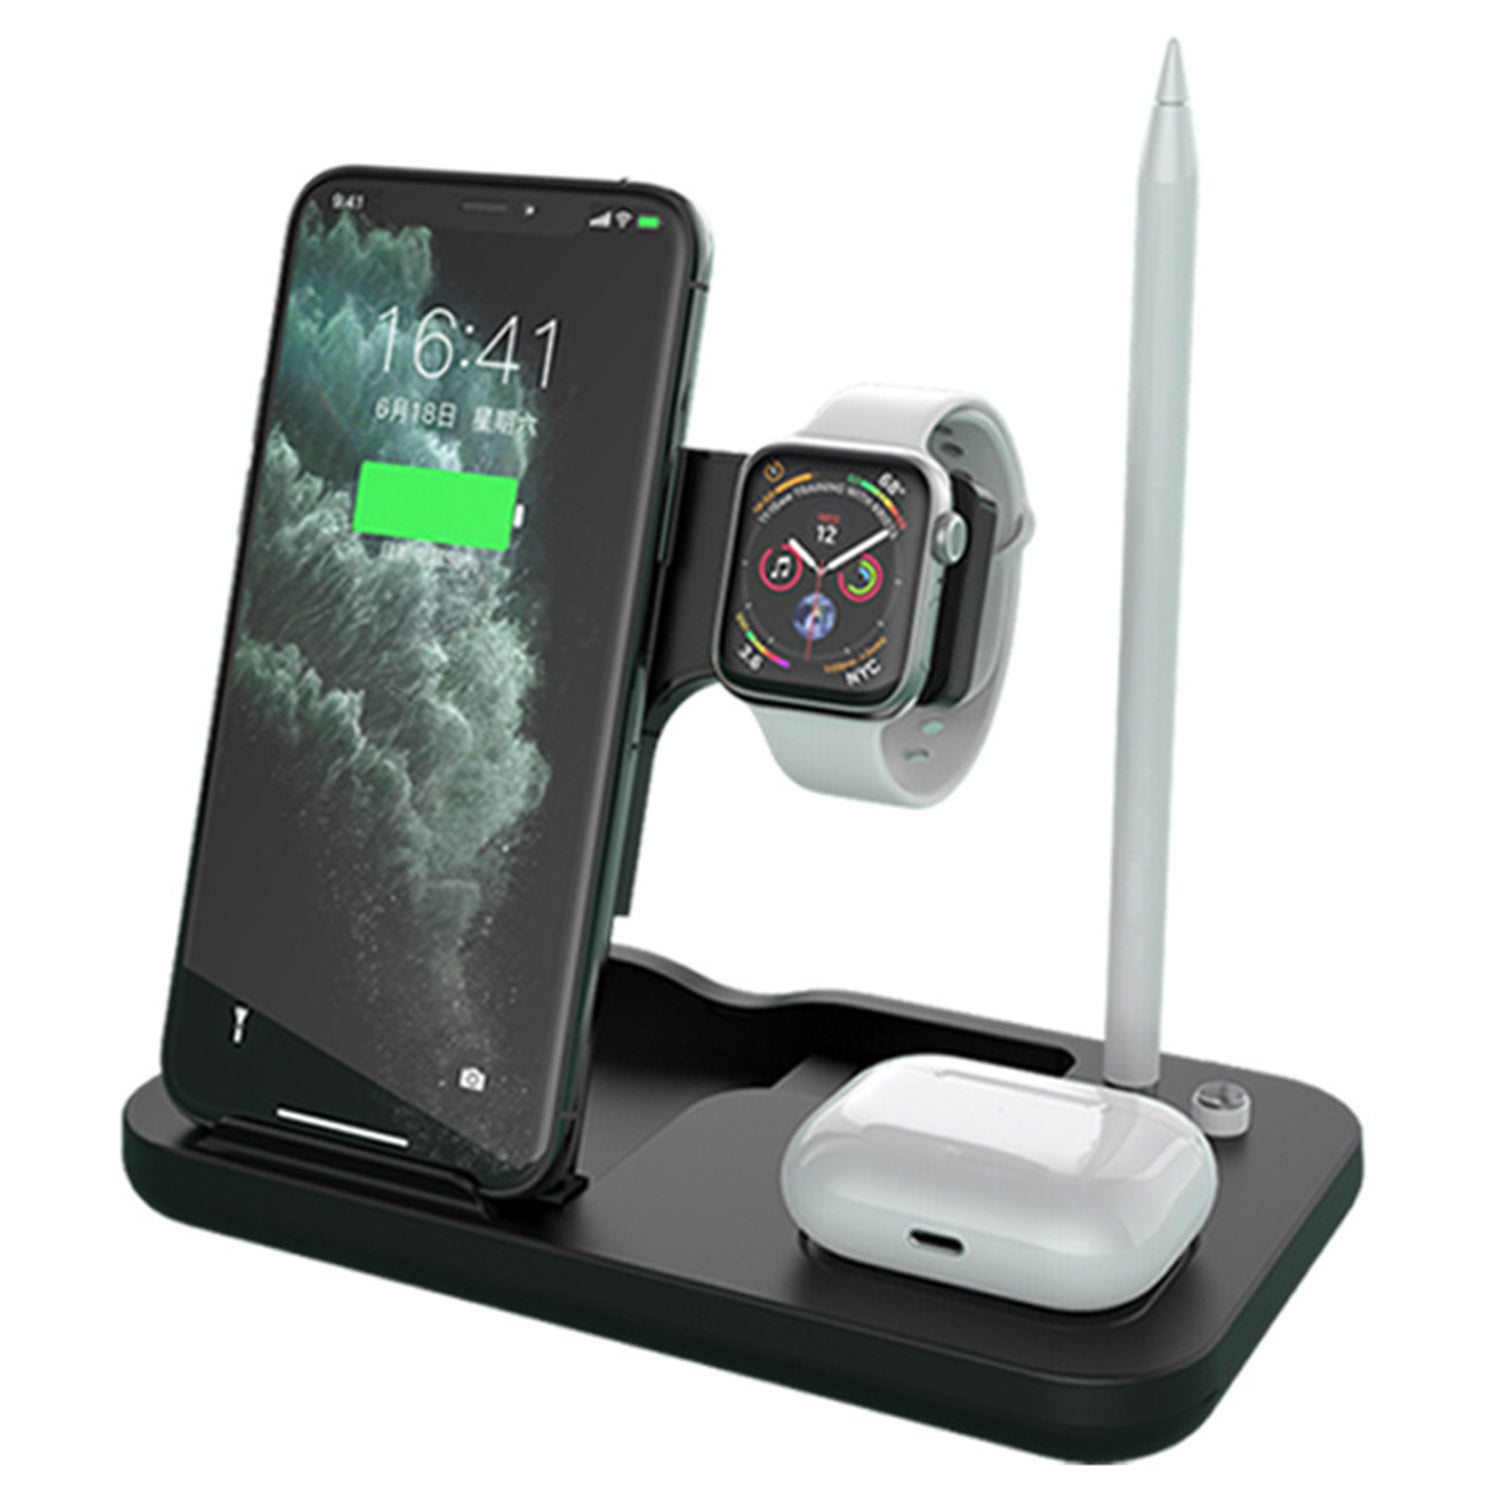 4 in 1 Wireless charger Dock Universal, Wireless Charger Stand Portable Charging Station Dock for Mobile Phone Watch Earphone, Foldable Design Wireless Charger